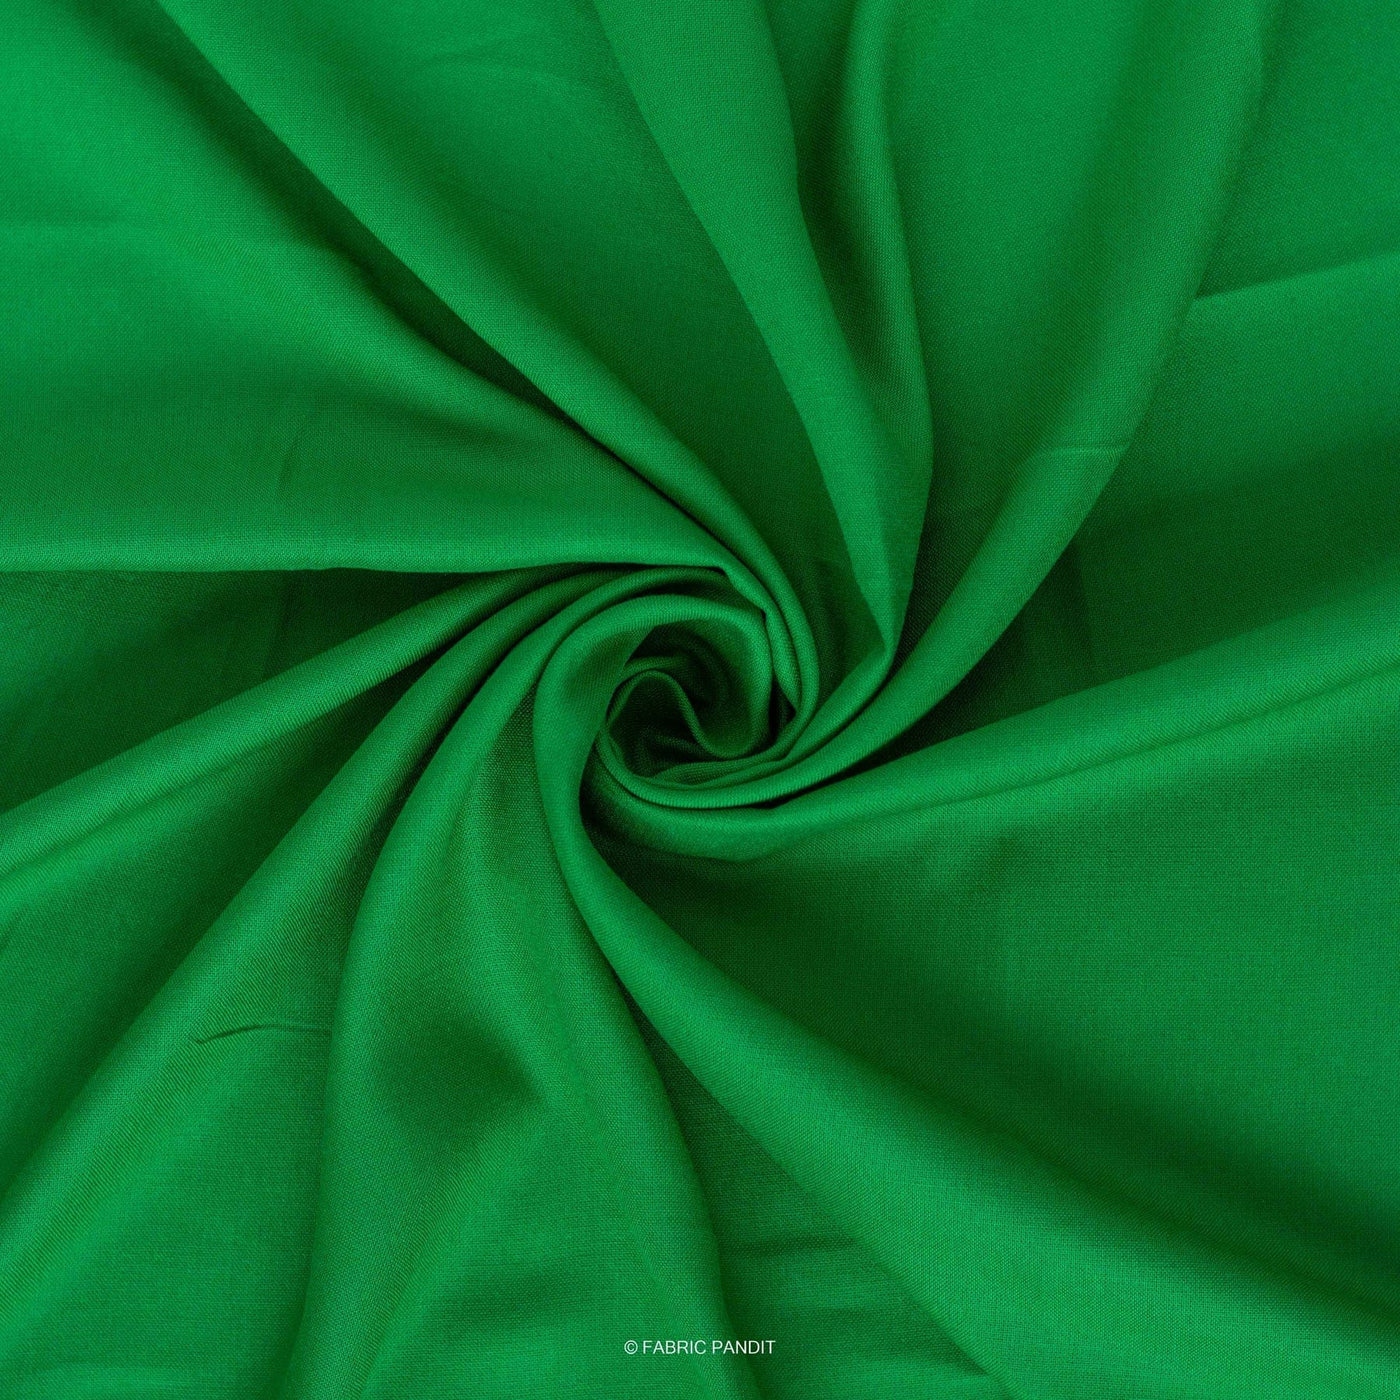 Fabric Pandit Fabric Bright Green Color Pure Rayon Fabric (42 Inches)